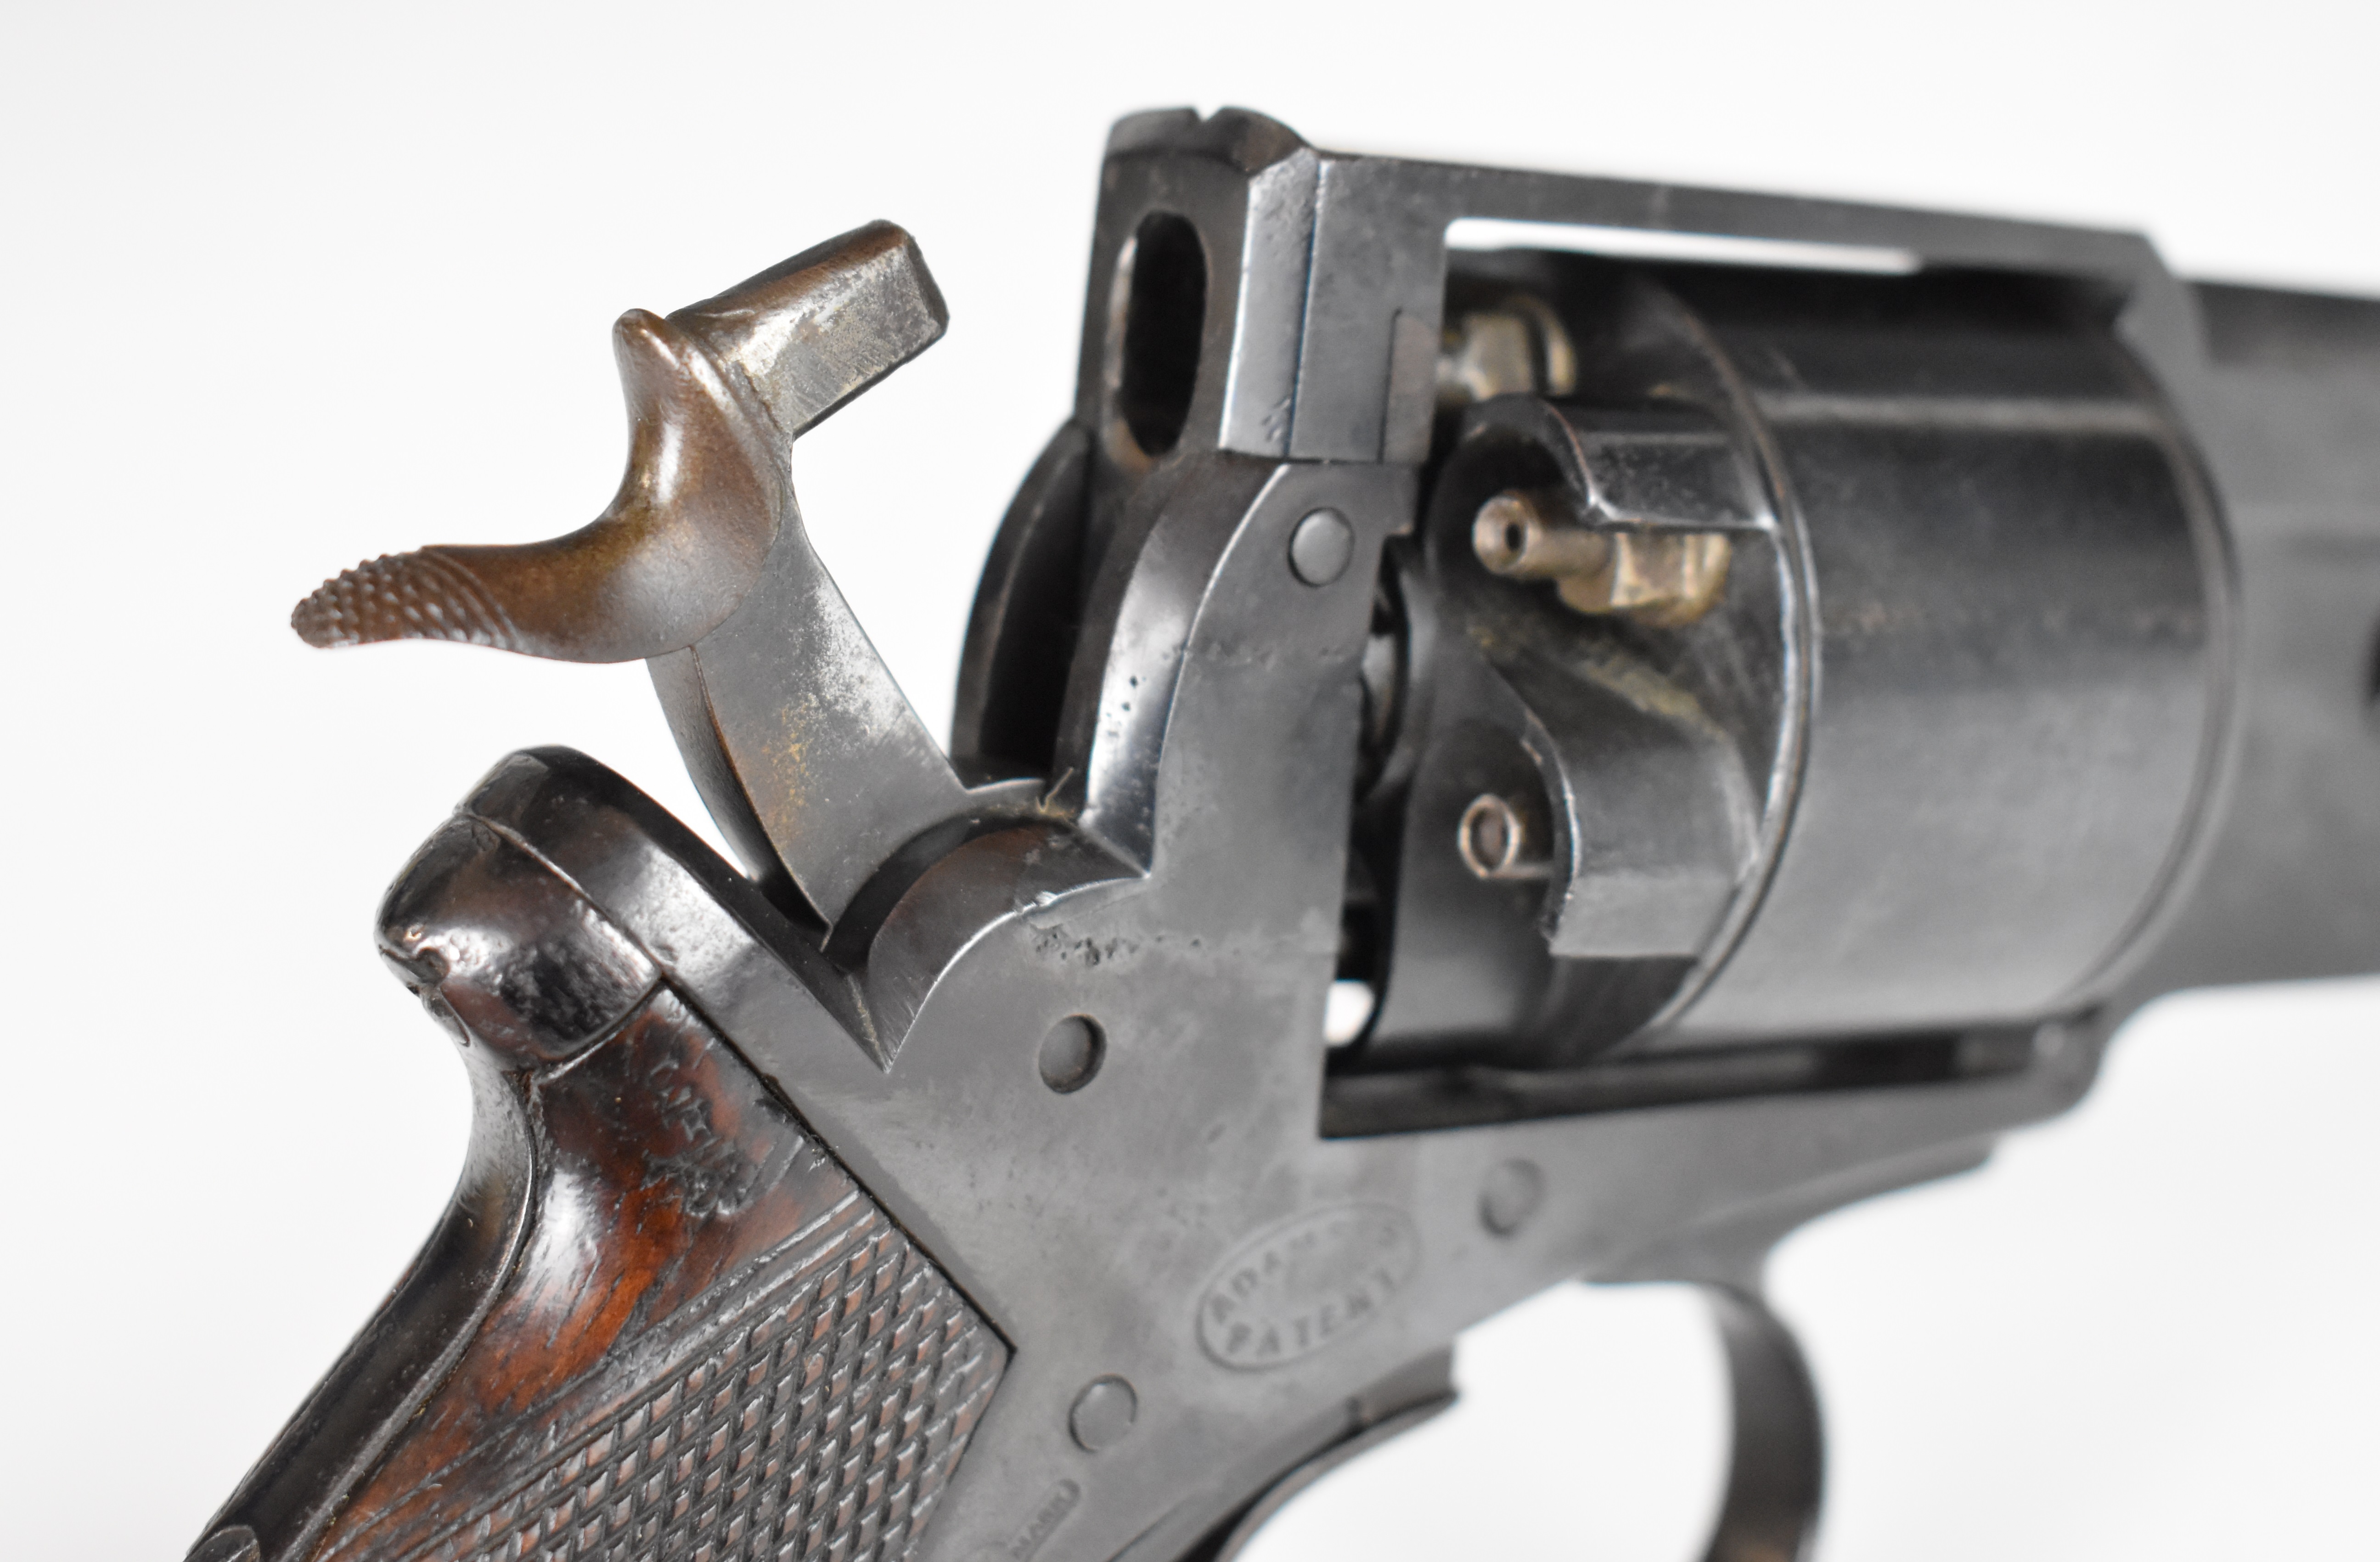 Adam's Patent 50 bore six-shot double-action revolver with chequered grip, line engraved cylinder, - Image 8 of 30